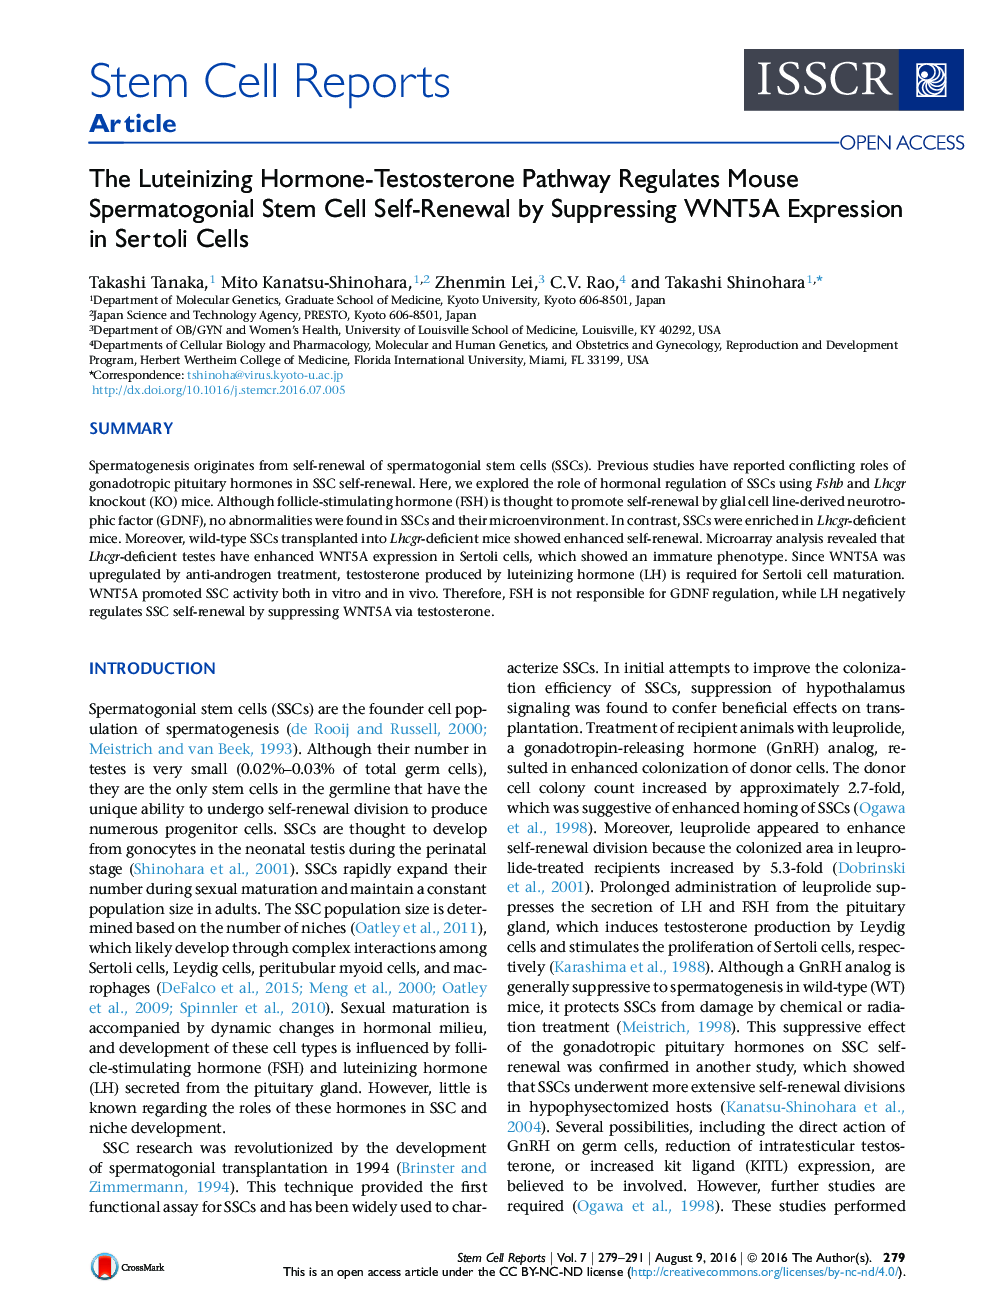 The Luteinizing Hormone-Testosterone Pathway Regulates Mouse Spermatogonial Stem Cell Self-Renewal by Suppressing WNT5A Expression in Sertoli Cells